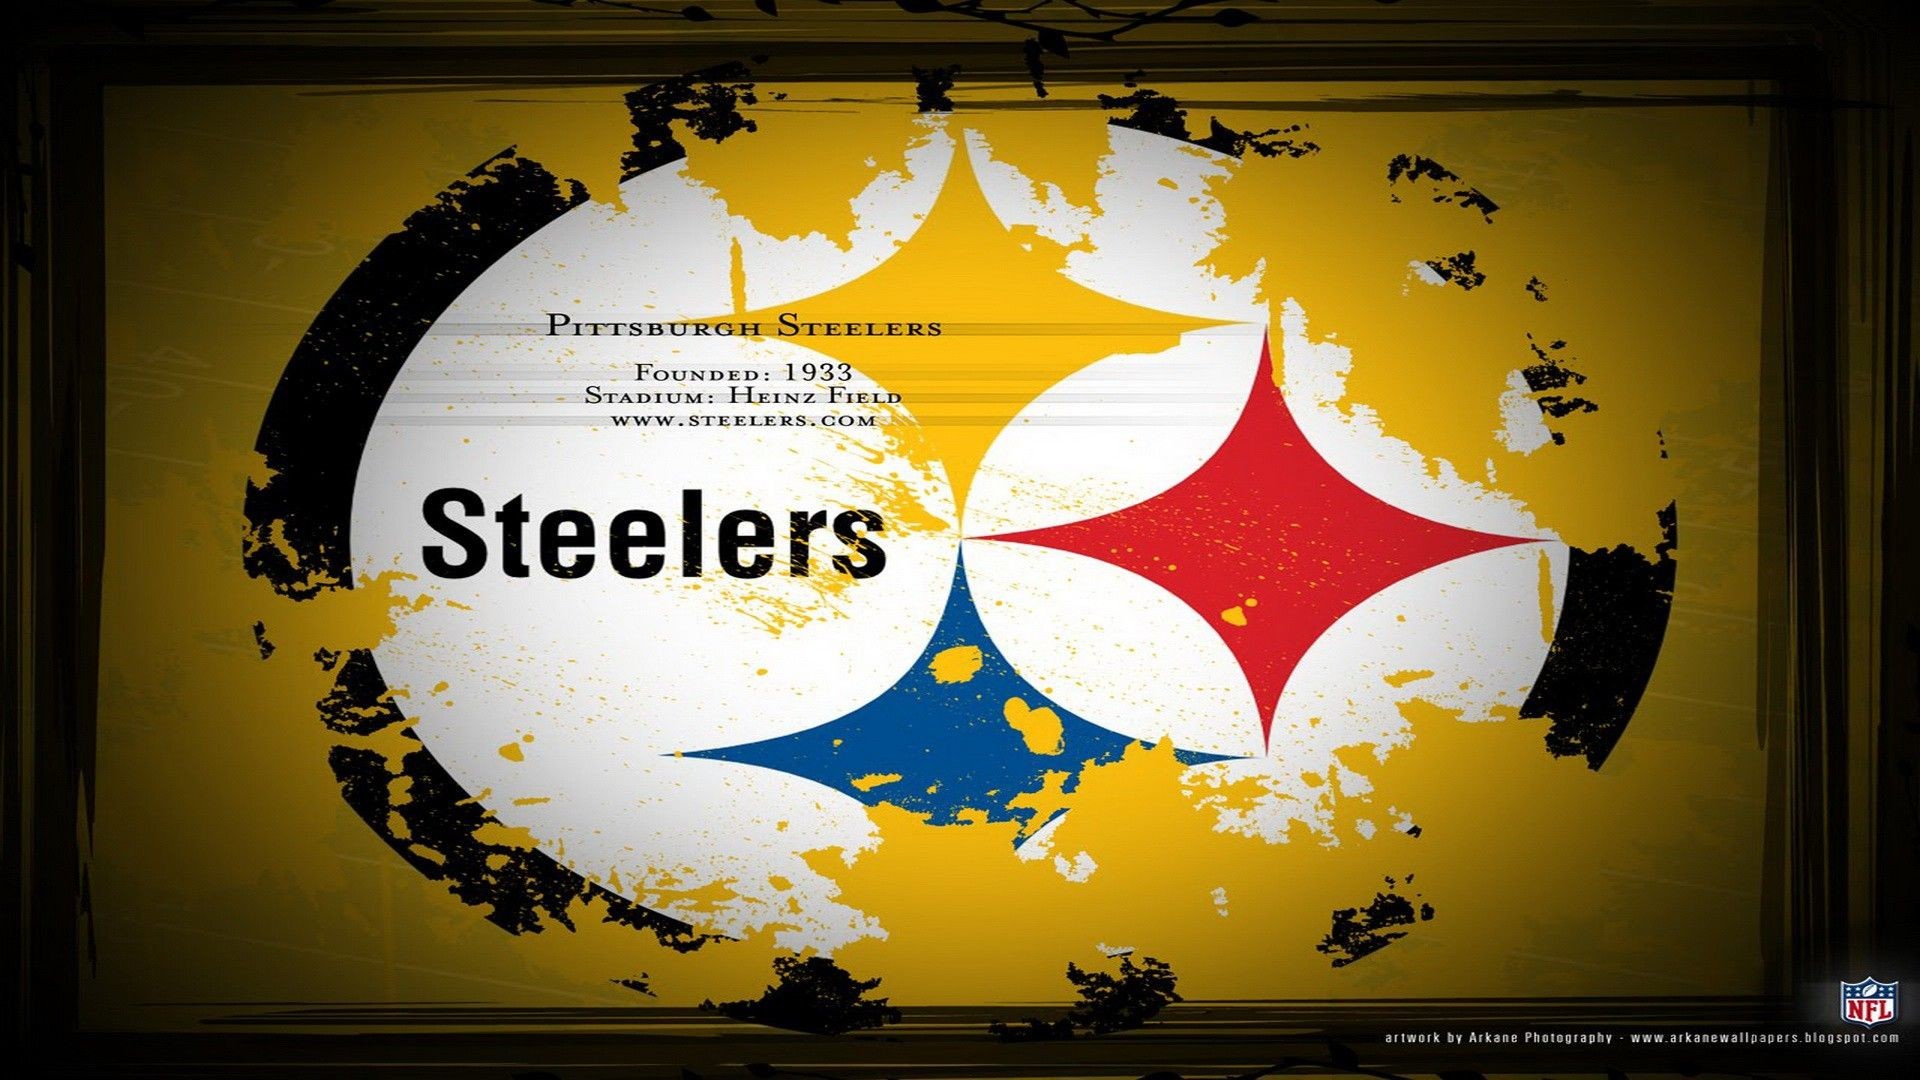 1920x1080 Pittsburgh Steelers Wallpaper Ws13ps